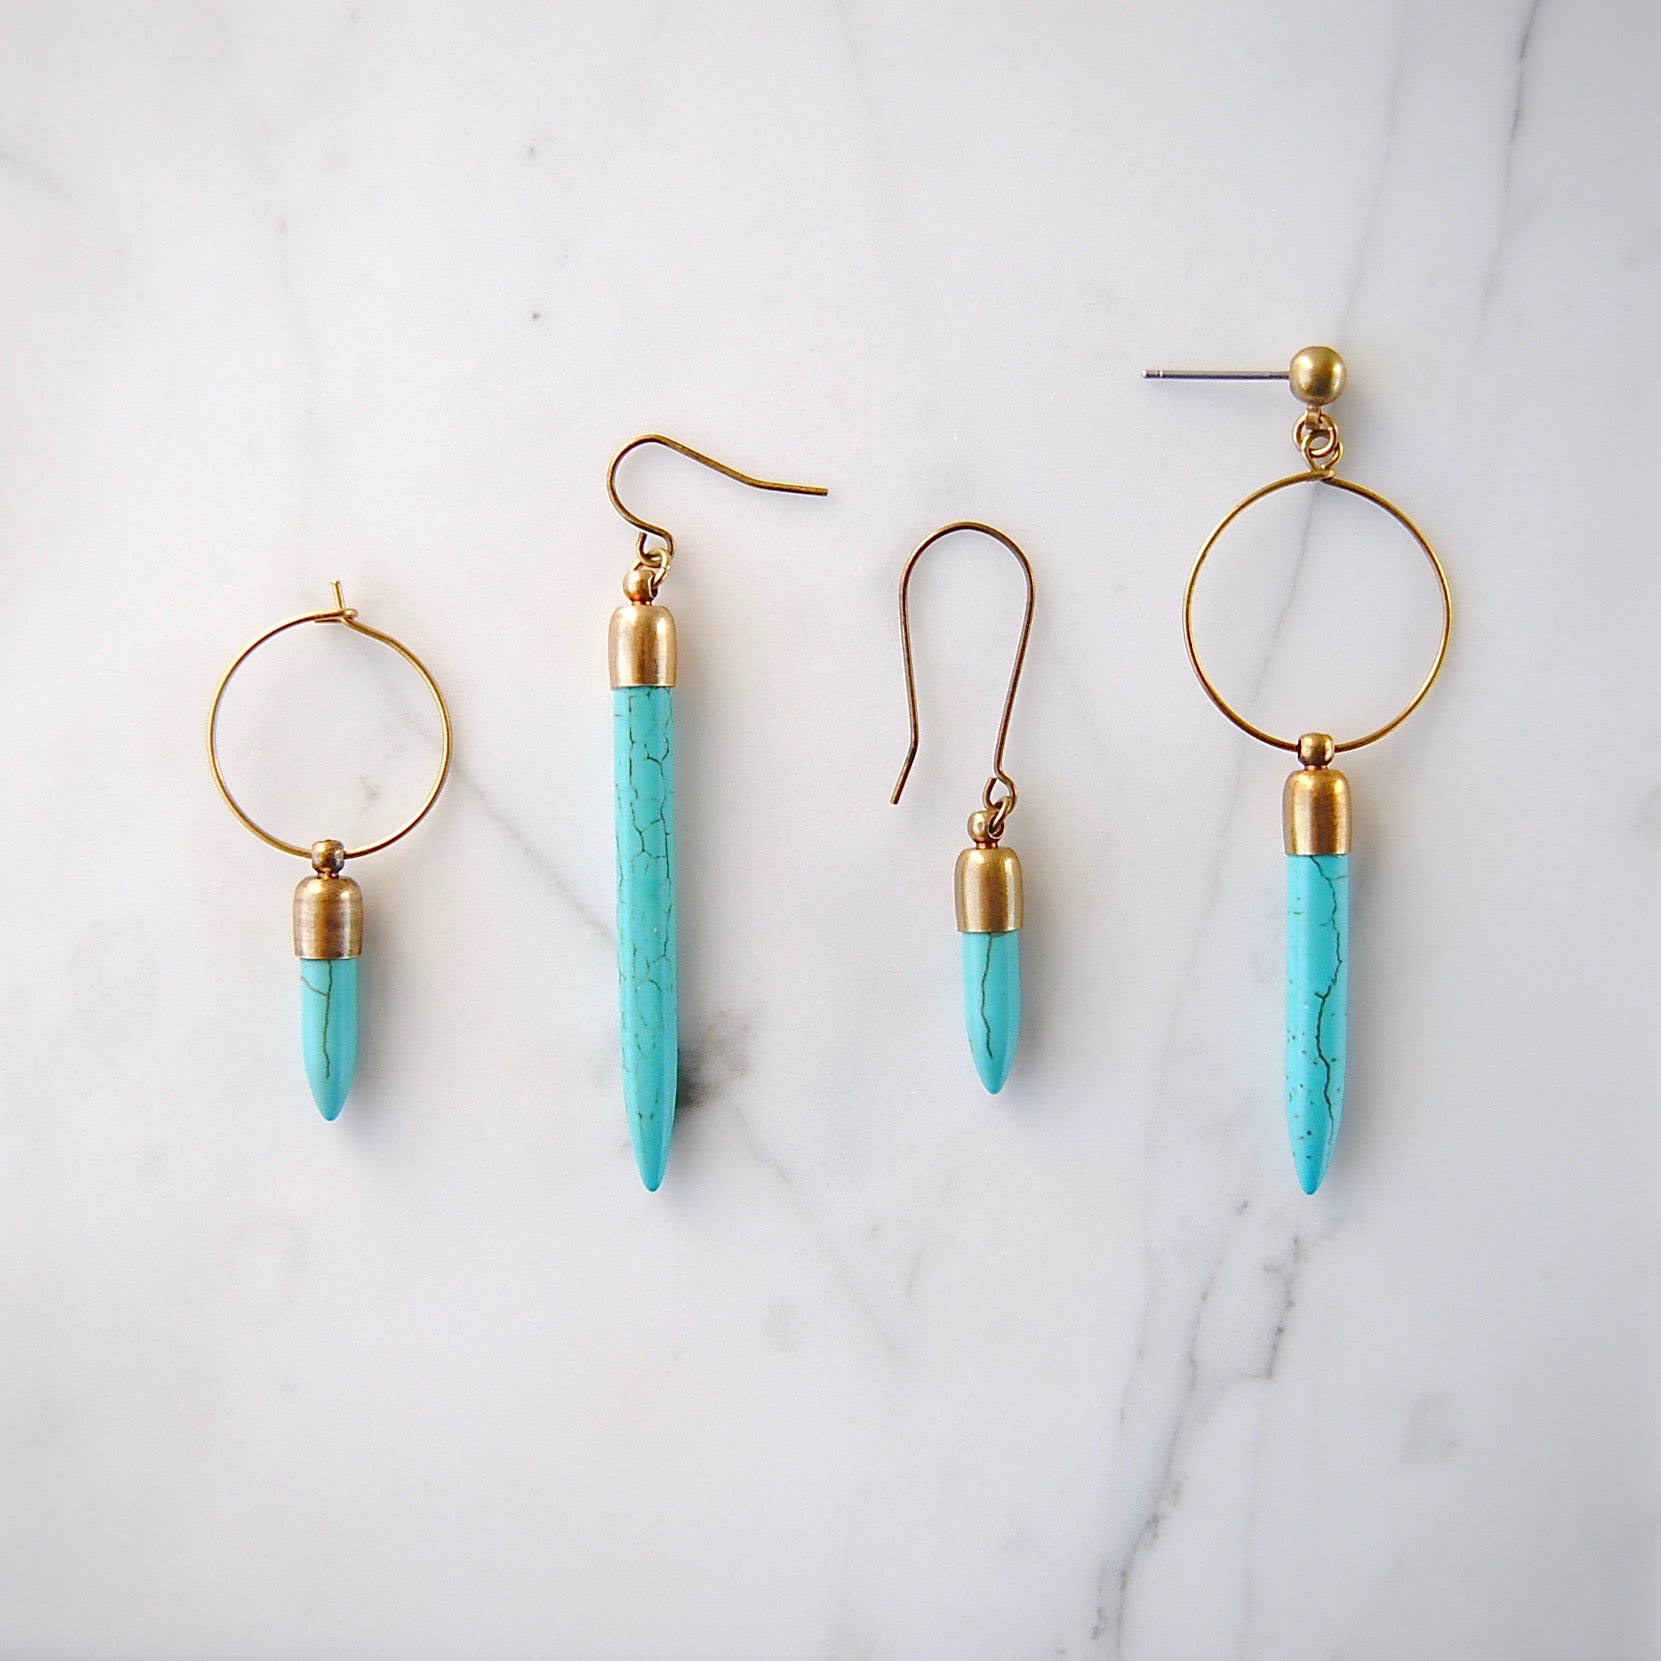 COORDINATING EARRING STYLES